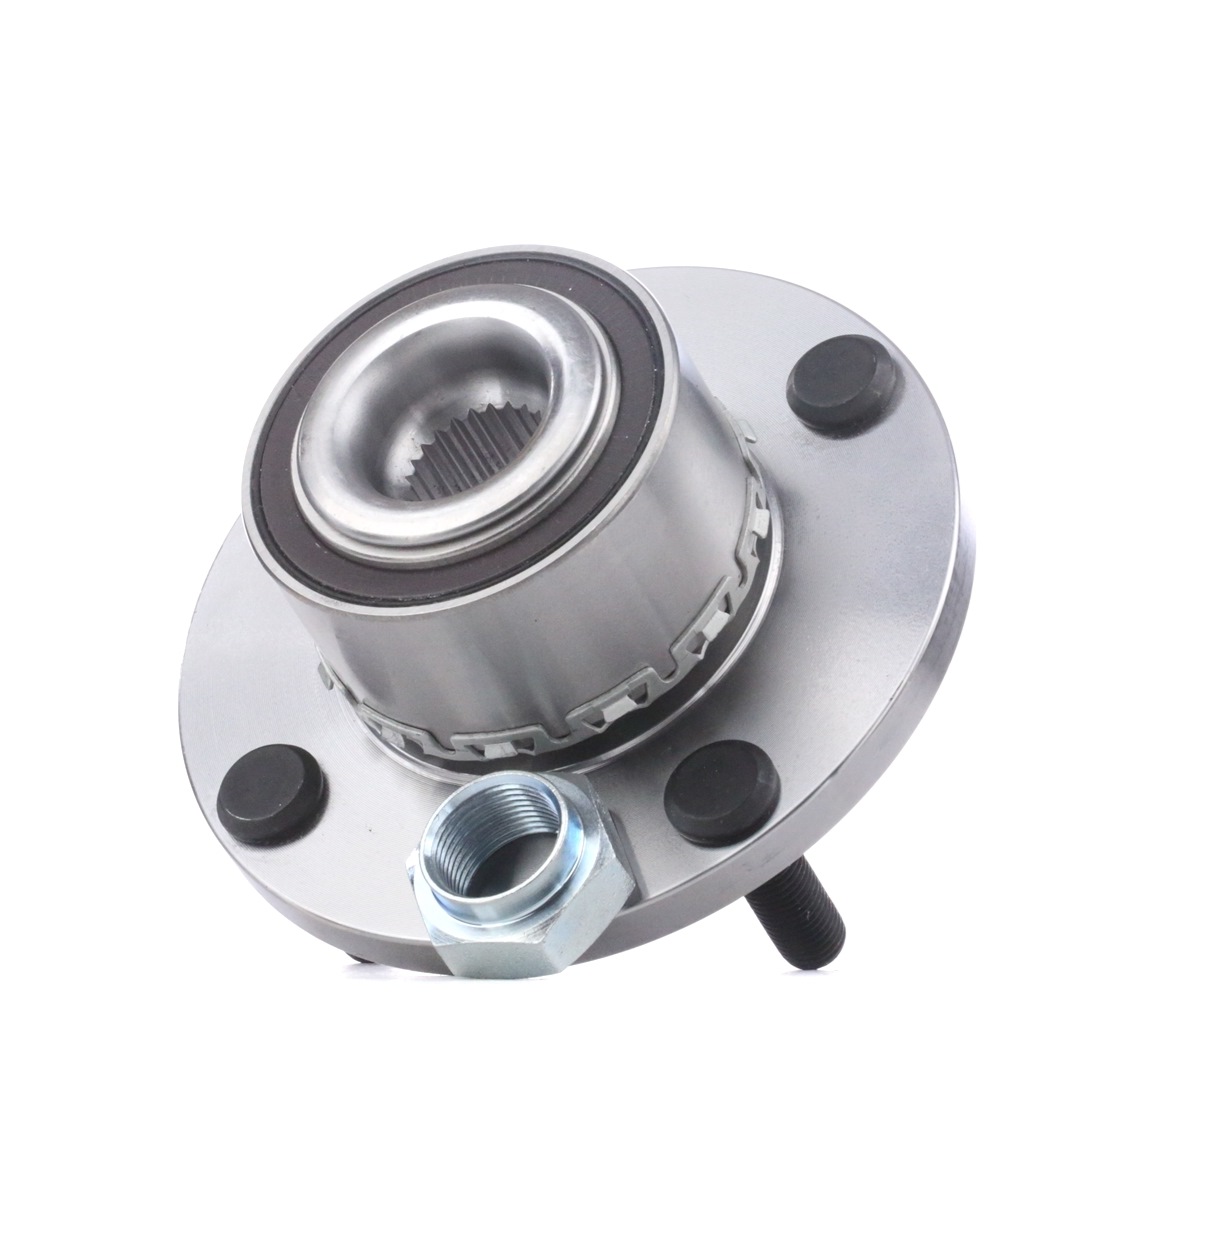 RIDEX 654W0464 Wheel bearing kit Front axle both sides, with accessories, with wheel hub, with ABS sensor ring, 137 mm